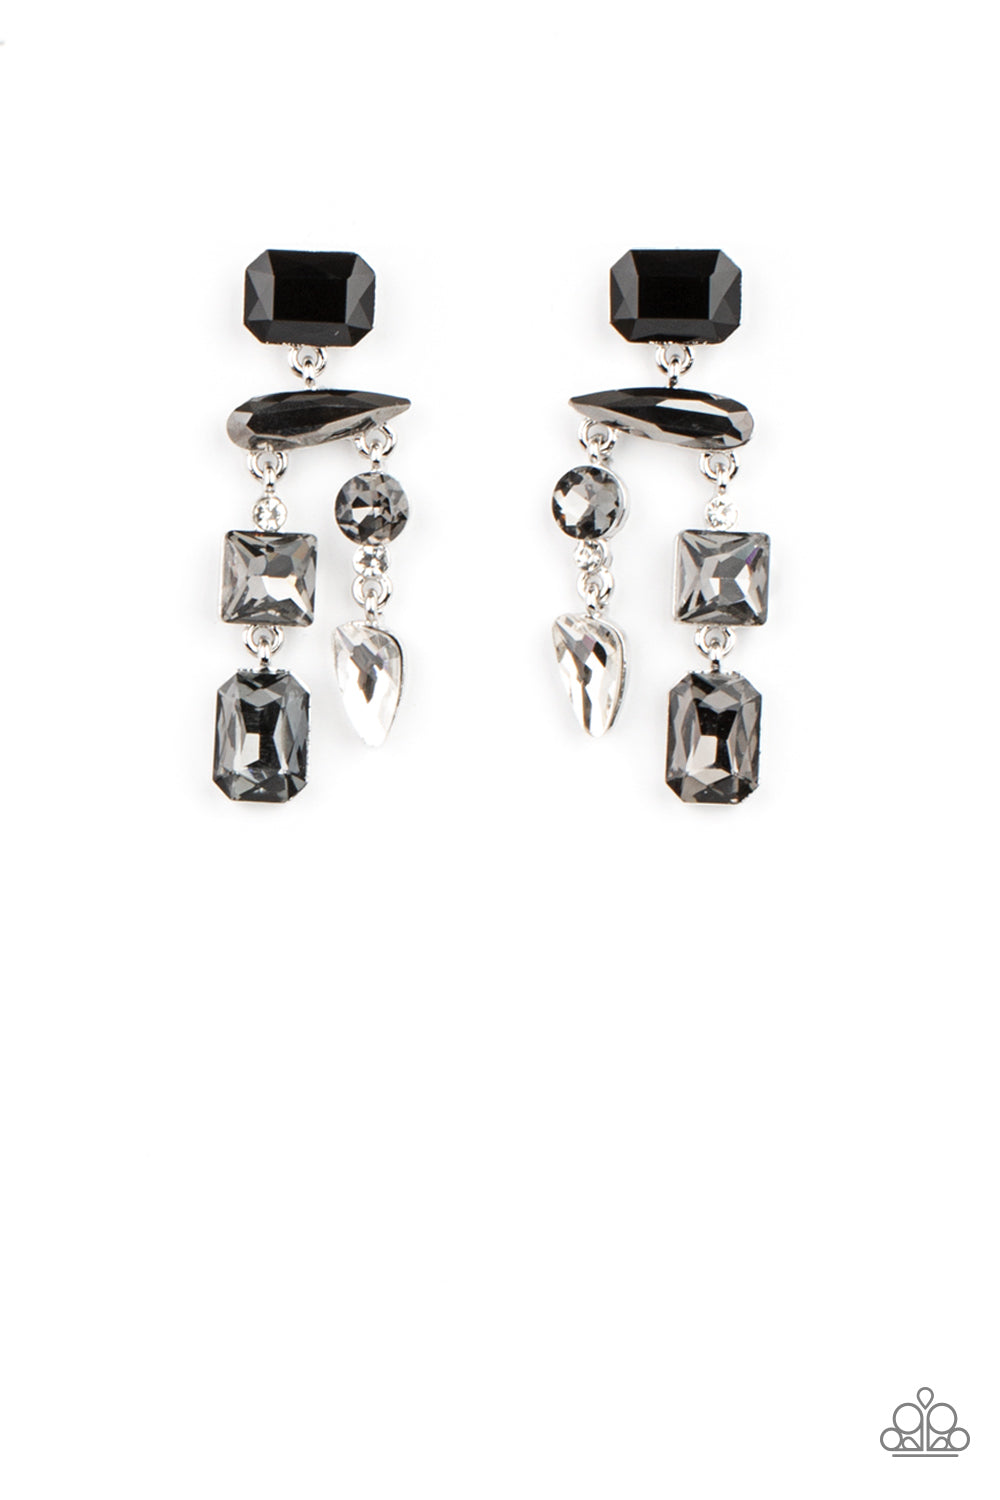 Varying in shape, a smoldering collection of black, smoky, and white gems haphazardly link into a edgy chandelier. 